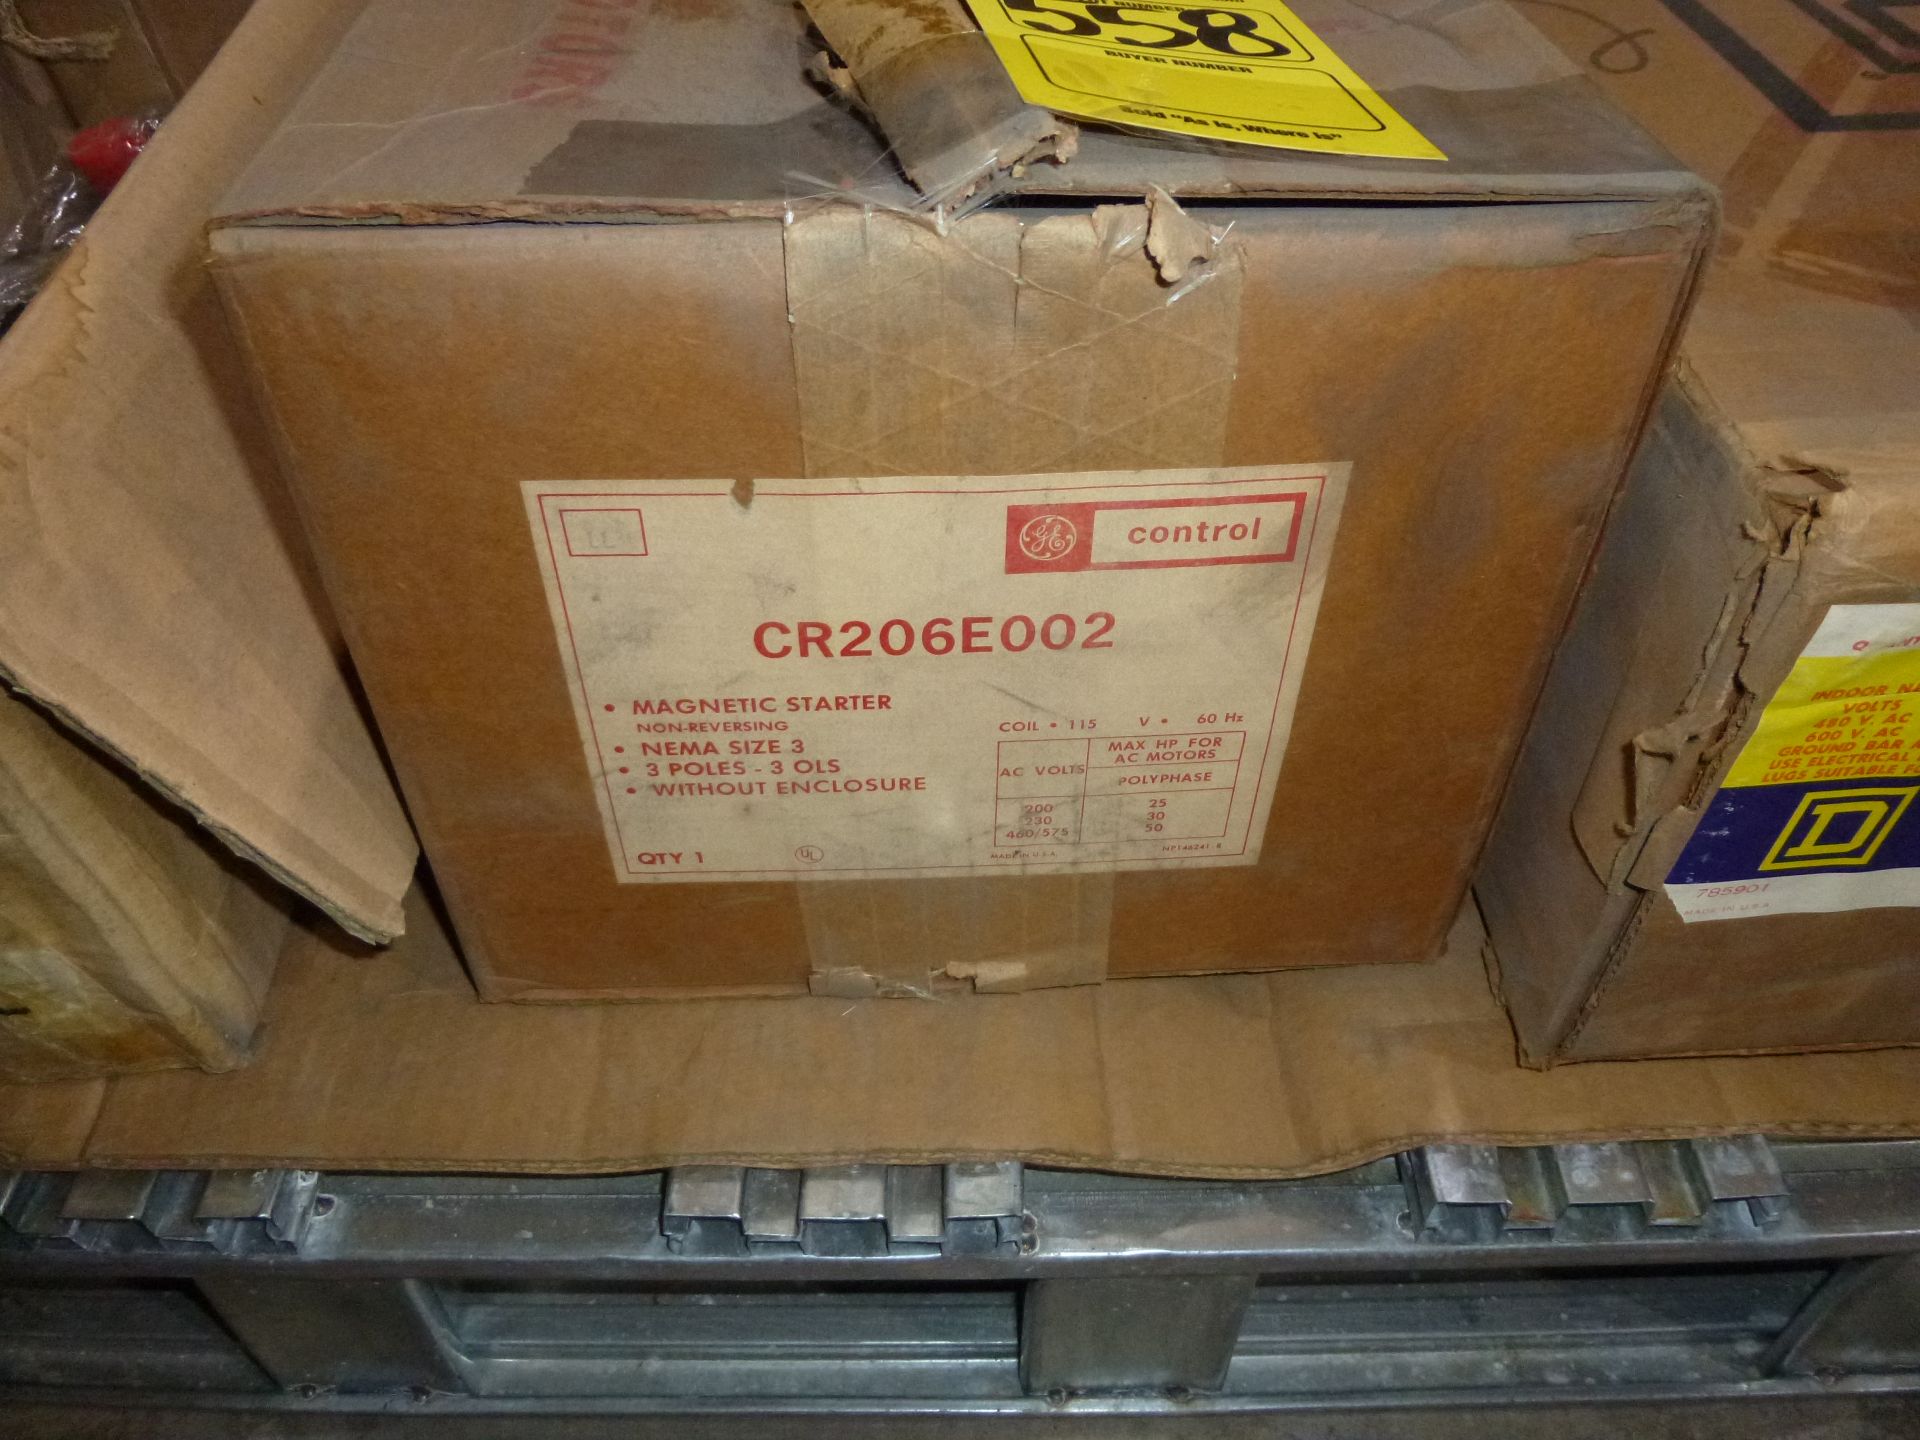 GE Controls Model CR206E002, new in box, as always with Brolyn LLC auctions, all lots can be - Image 2 of 2